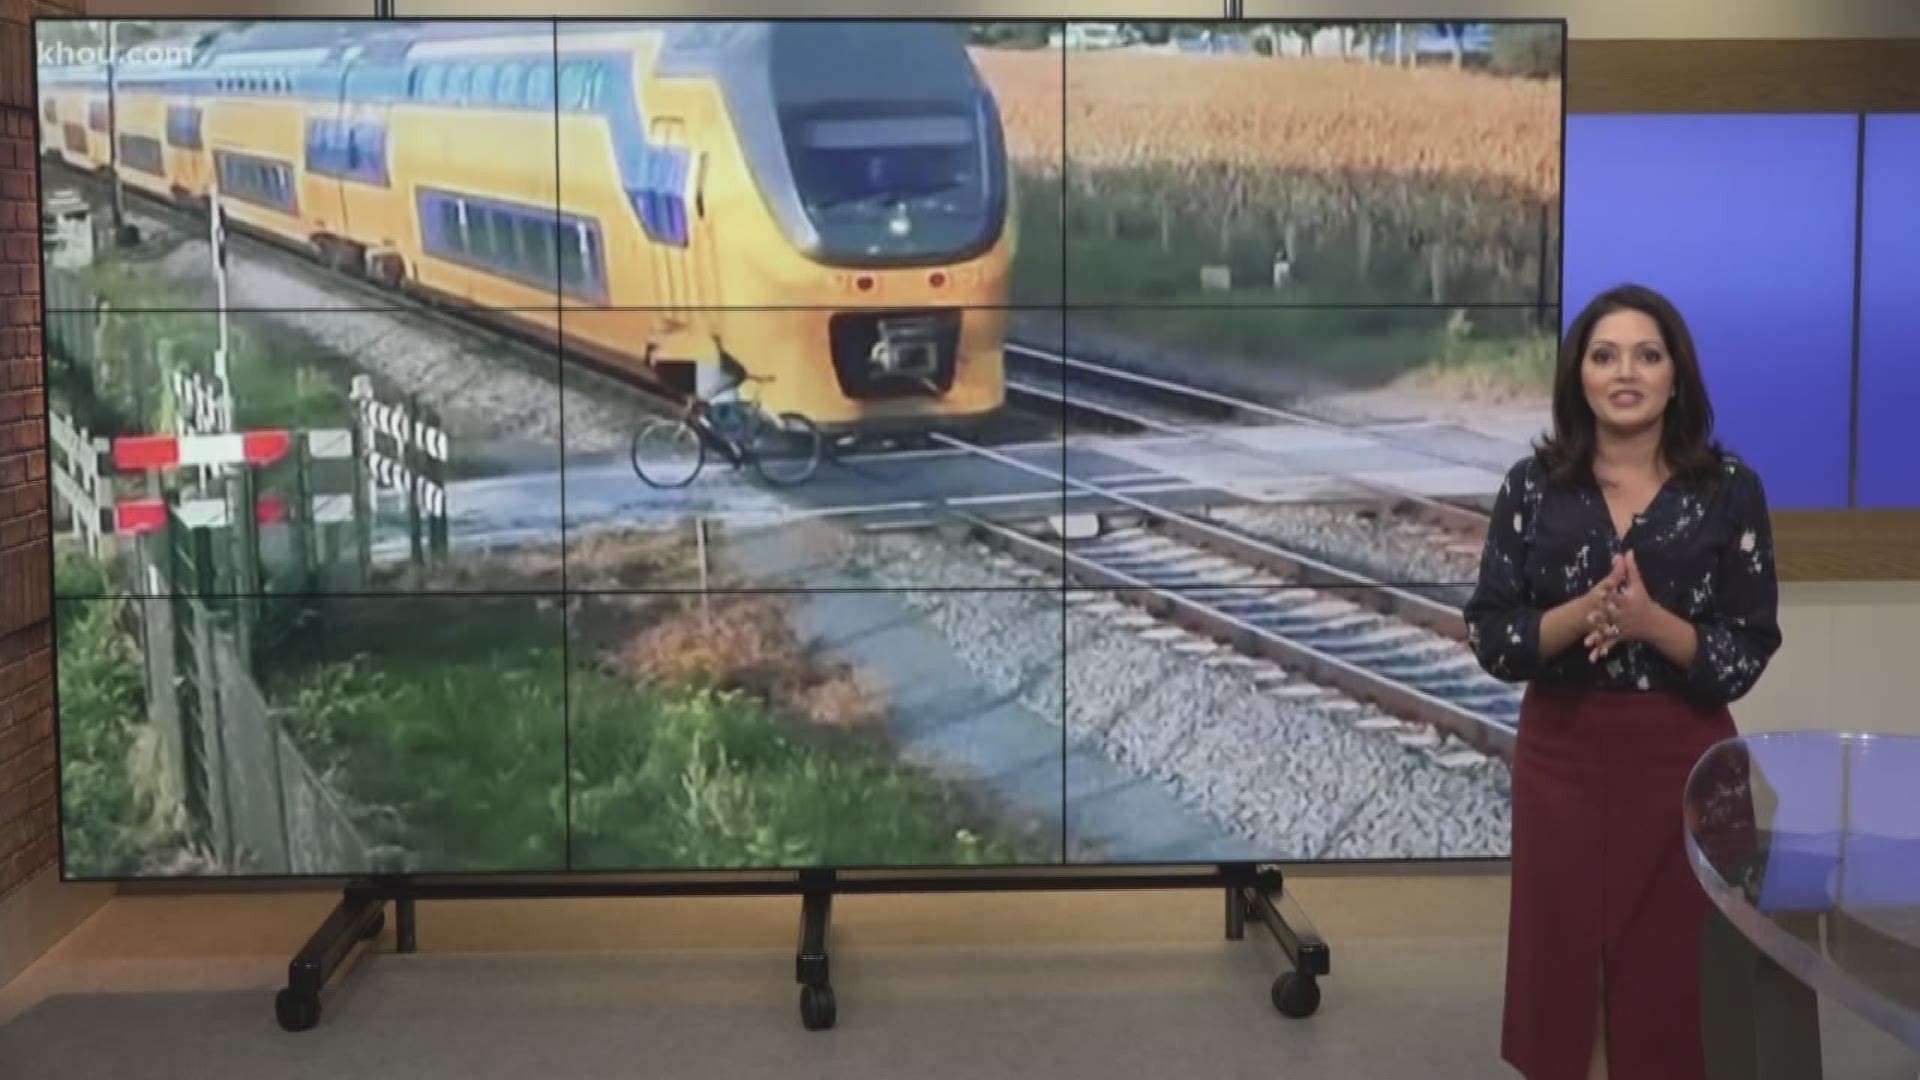 A close call was caught on camera in The Netherlands.